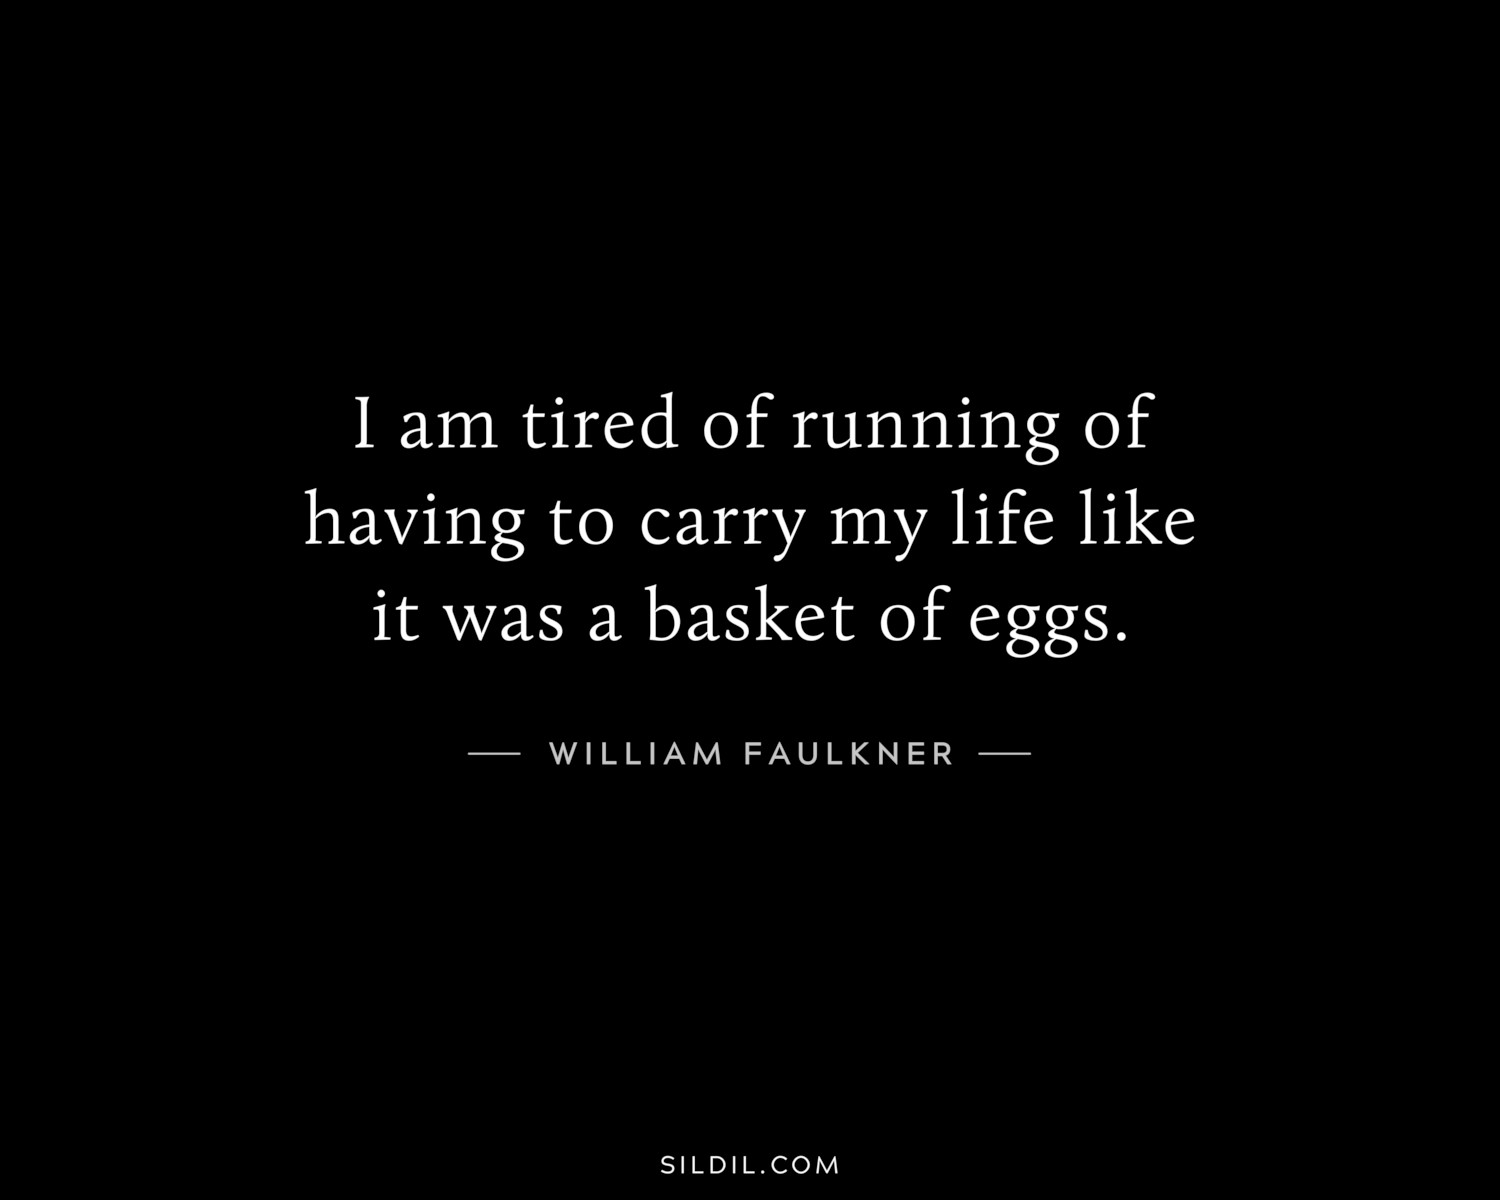 I am tired of running of having to carry my life like it was a basket of eggs.